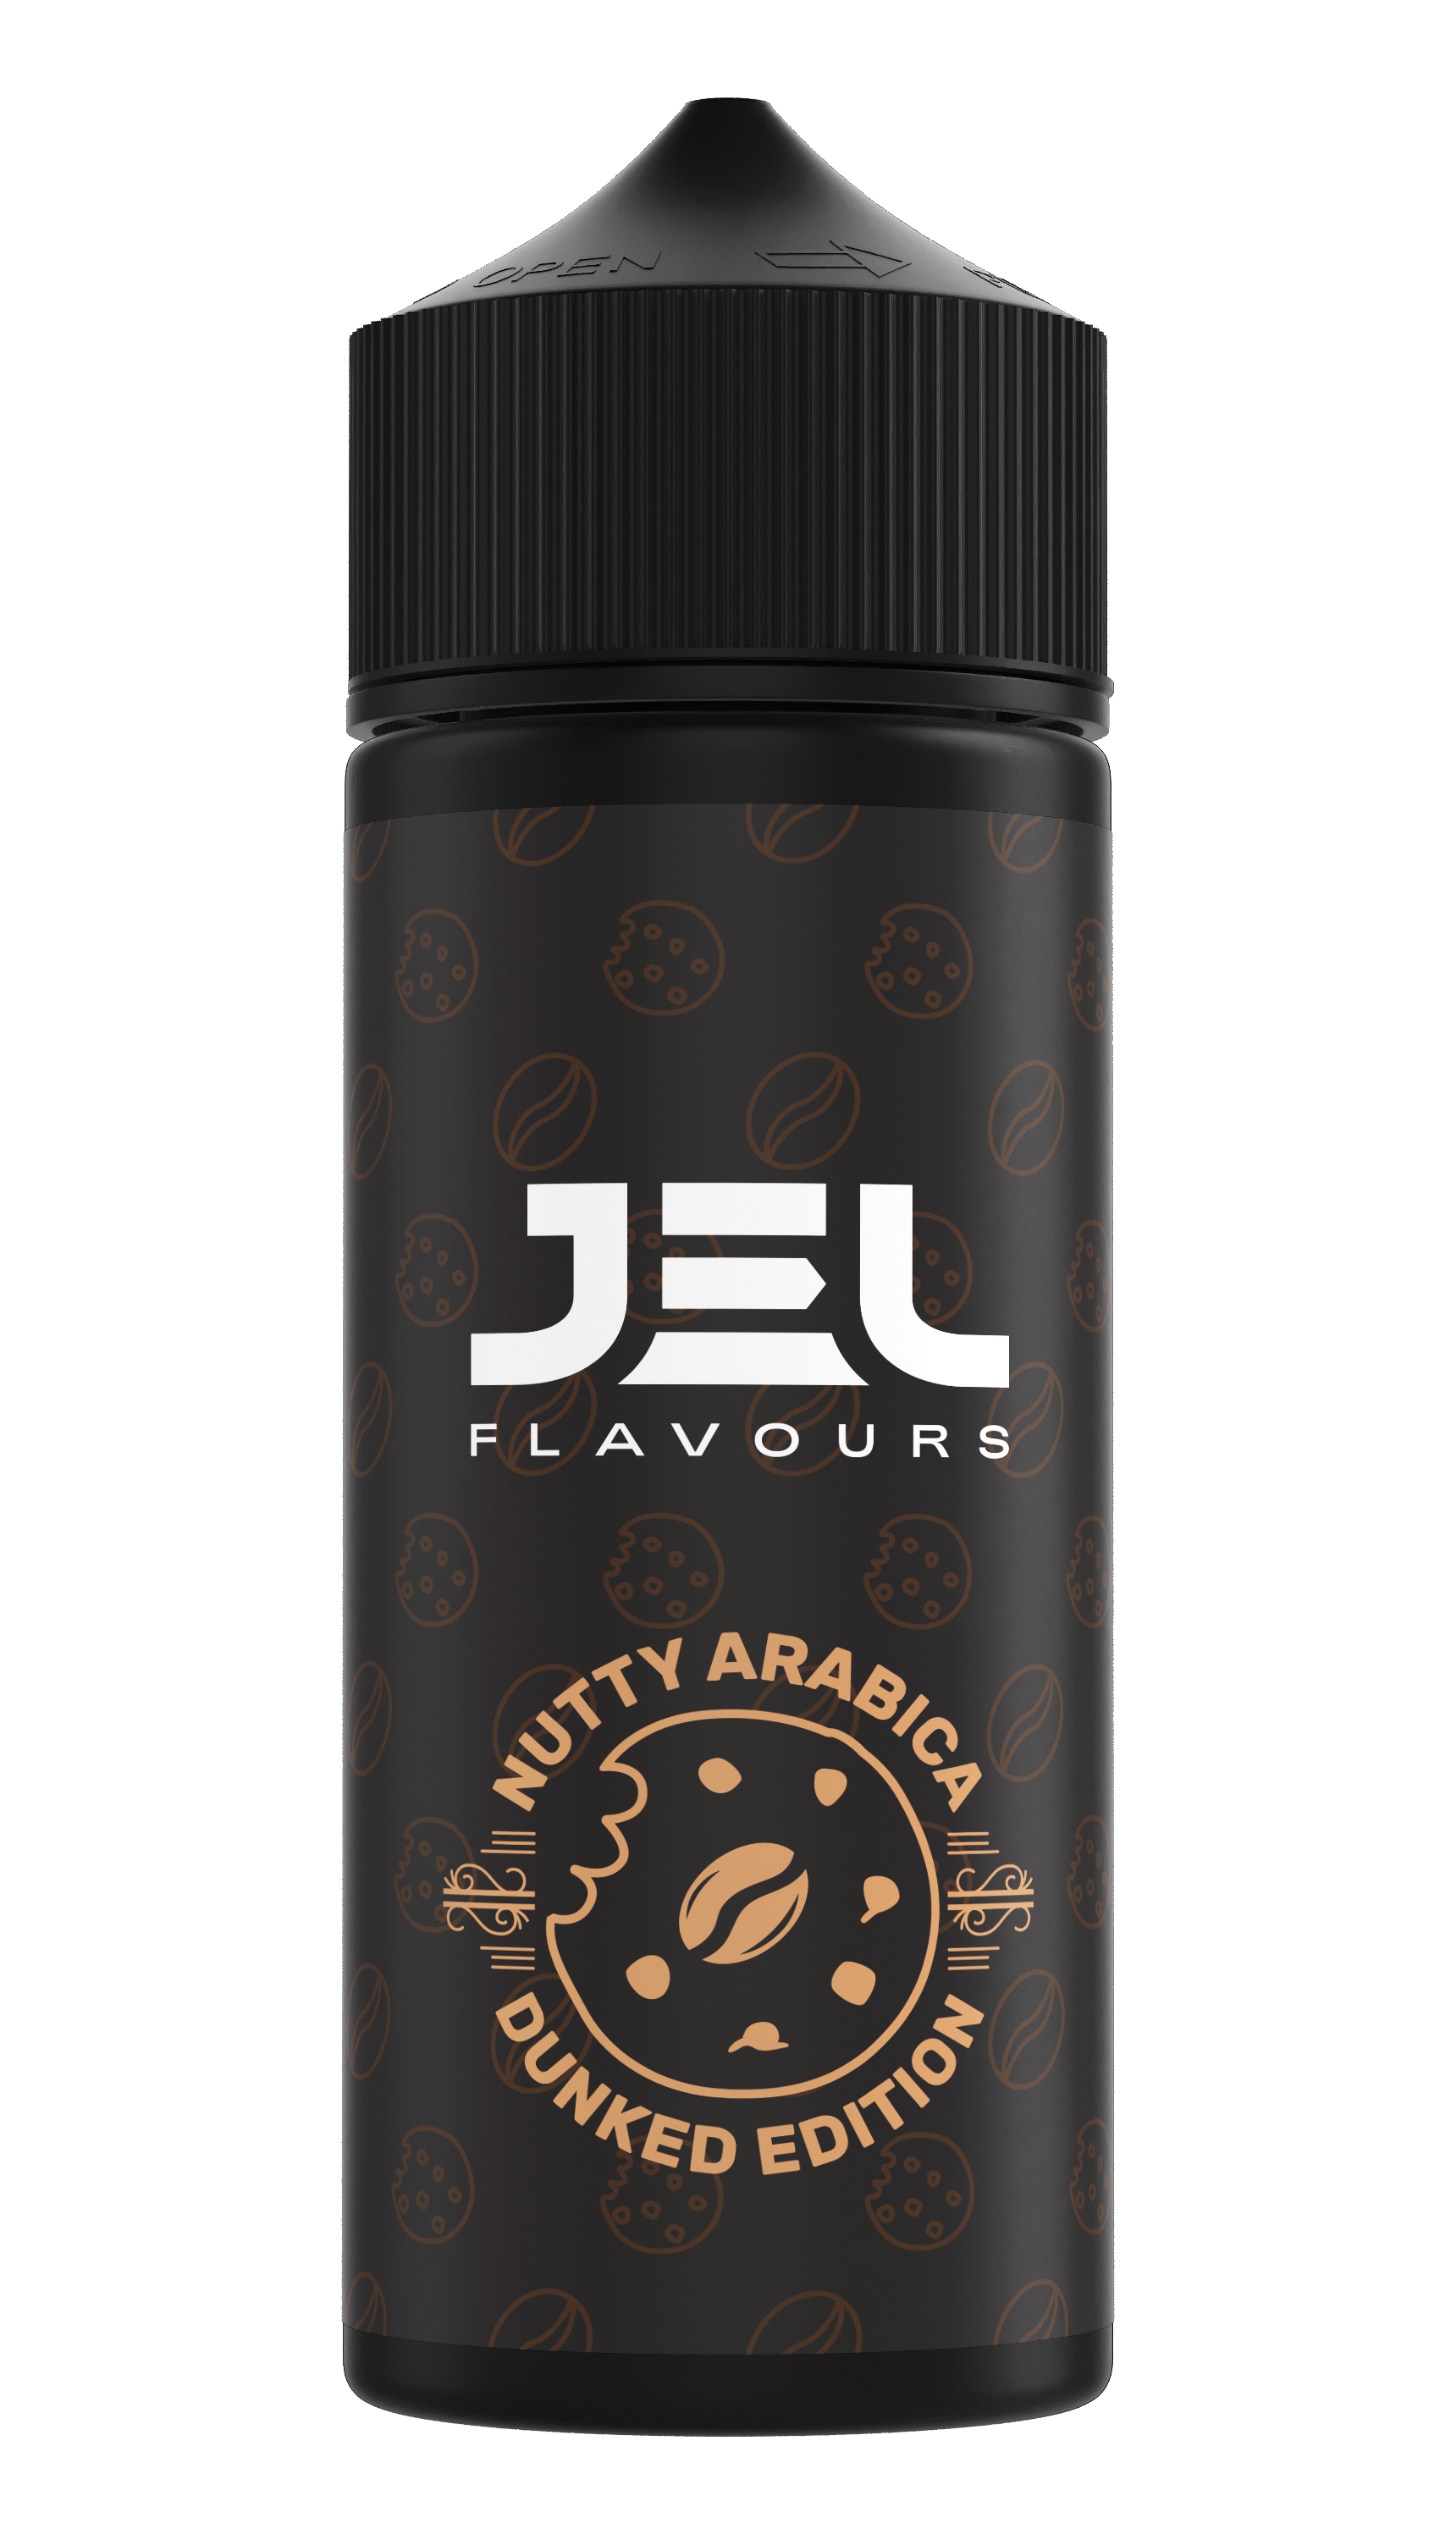 JEL Flavours Longfill - Nutty Arabica Dunked